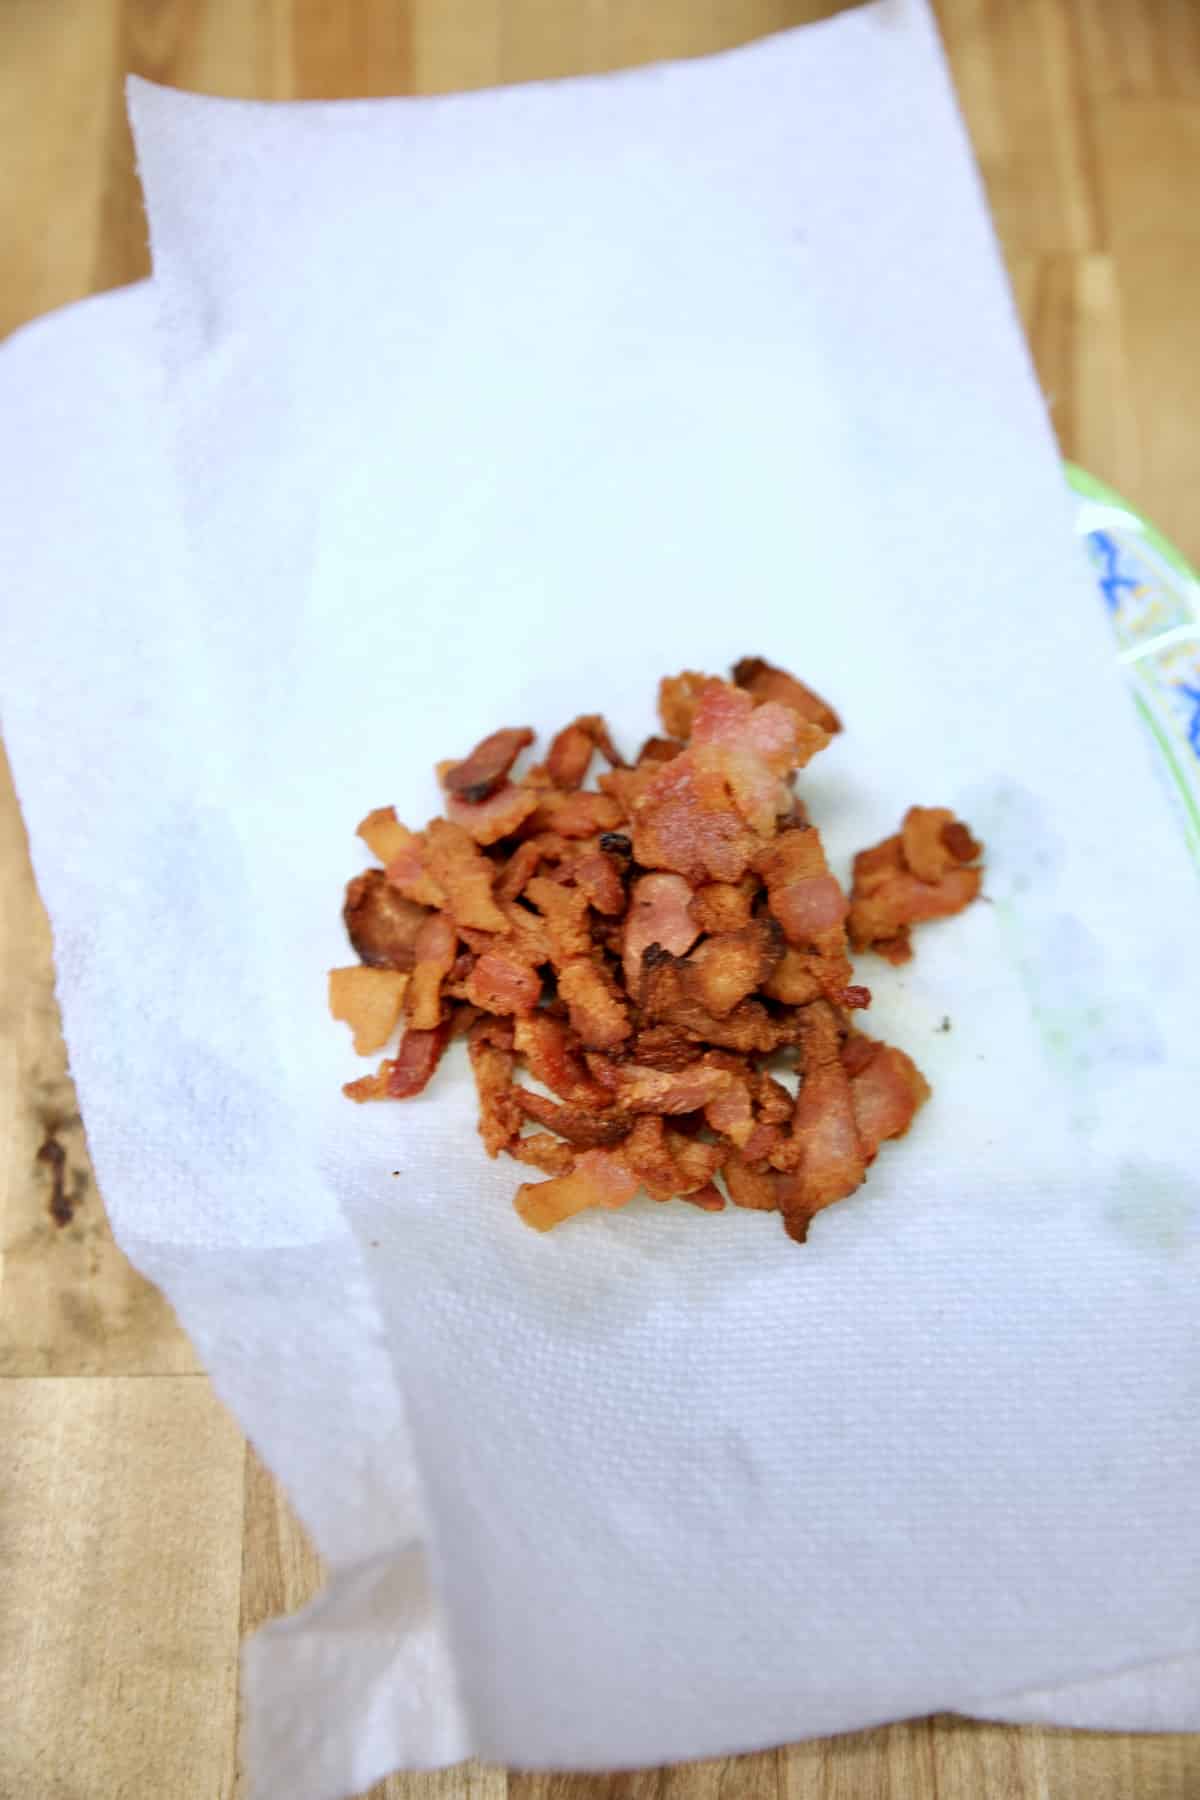 Bacon crumbles on a paper towel.